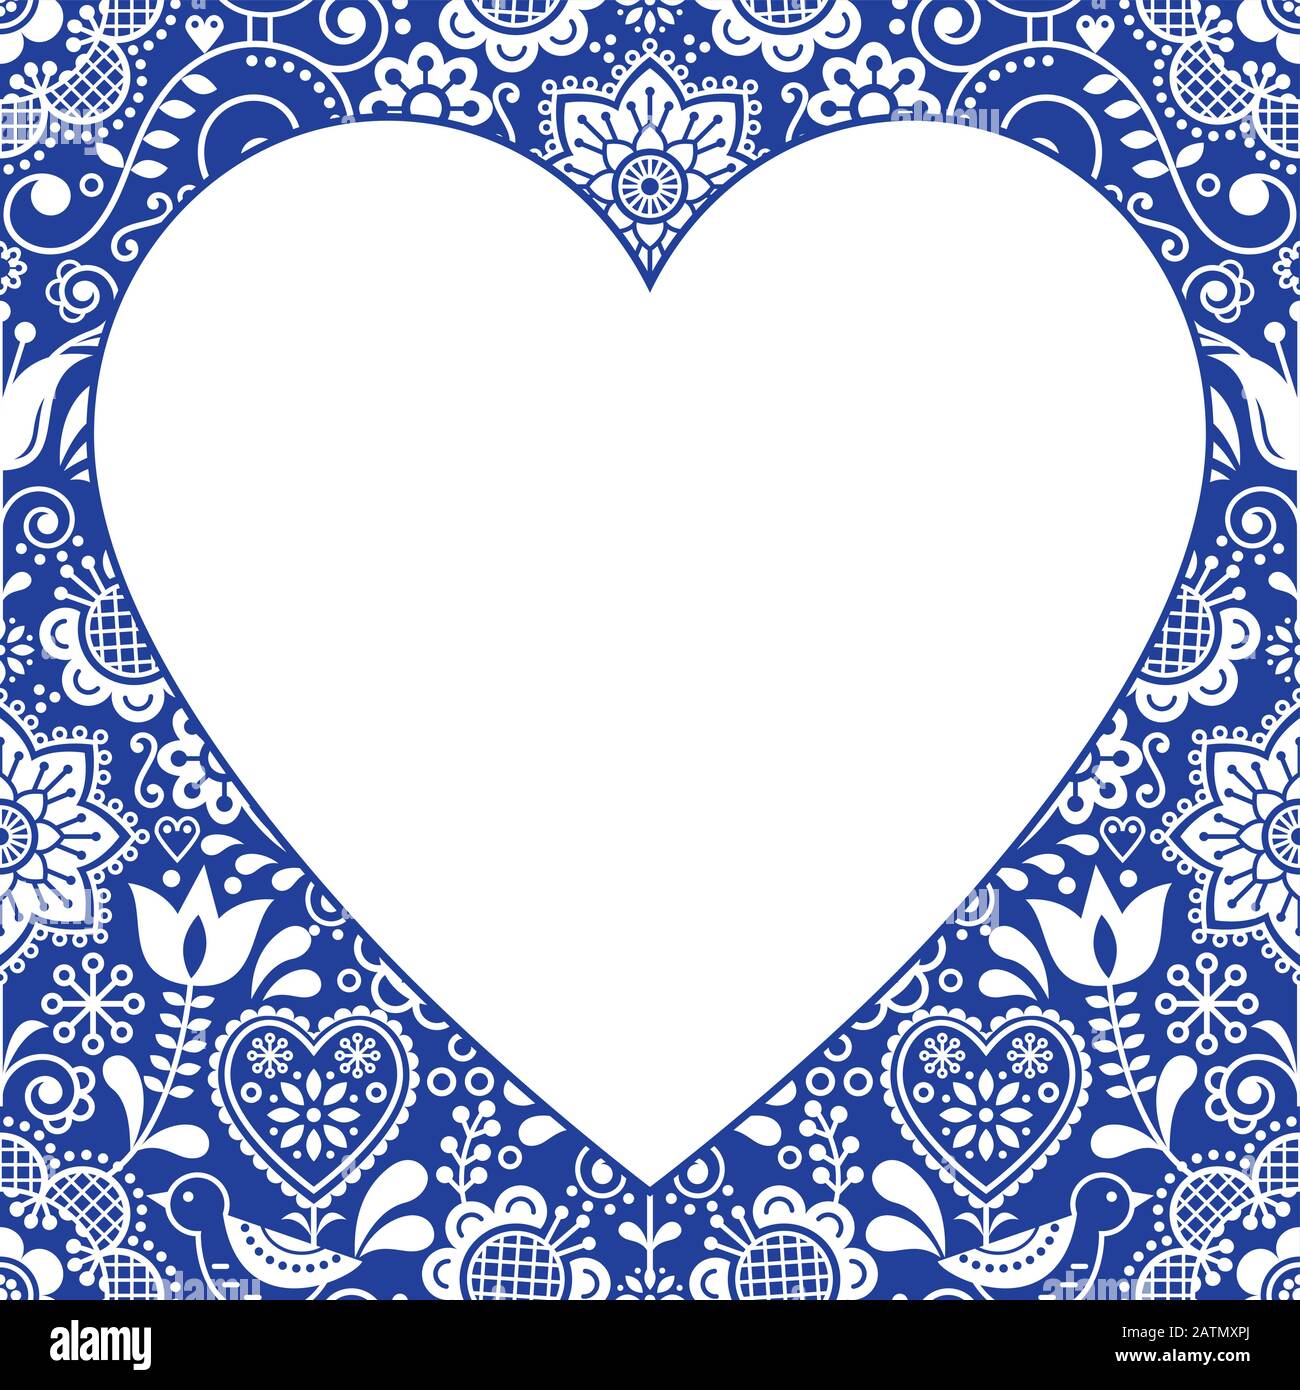 Valentine's Day greeting card, Folk heart vector design, Scandinavian floral background in white and navy blue Stock Vector